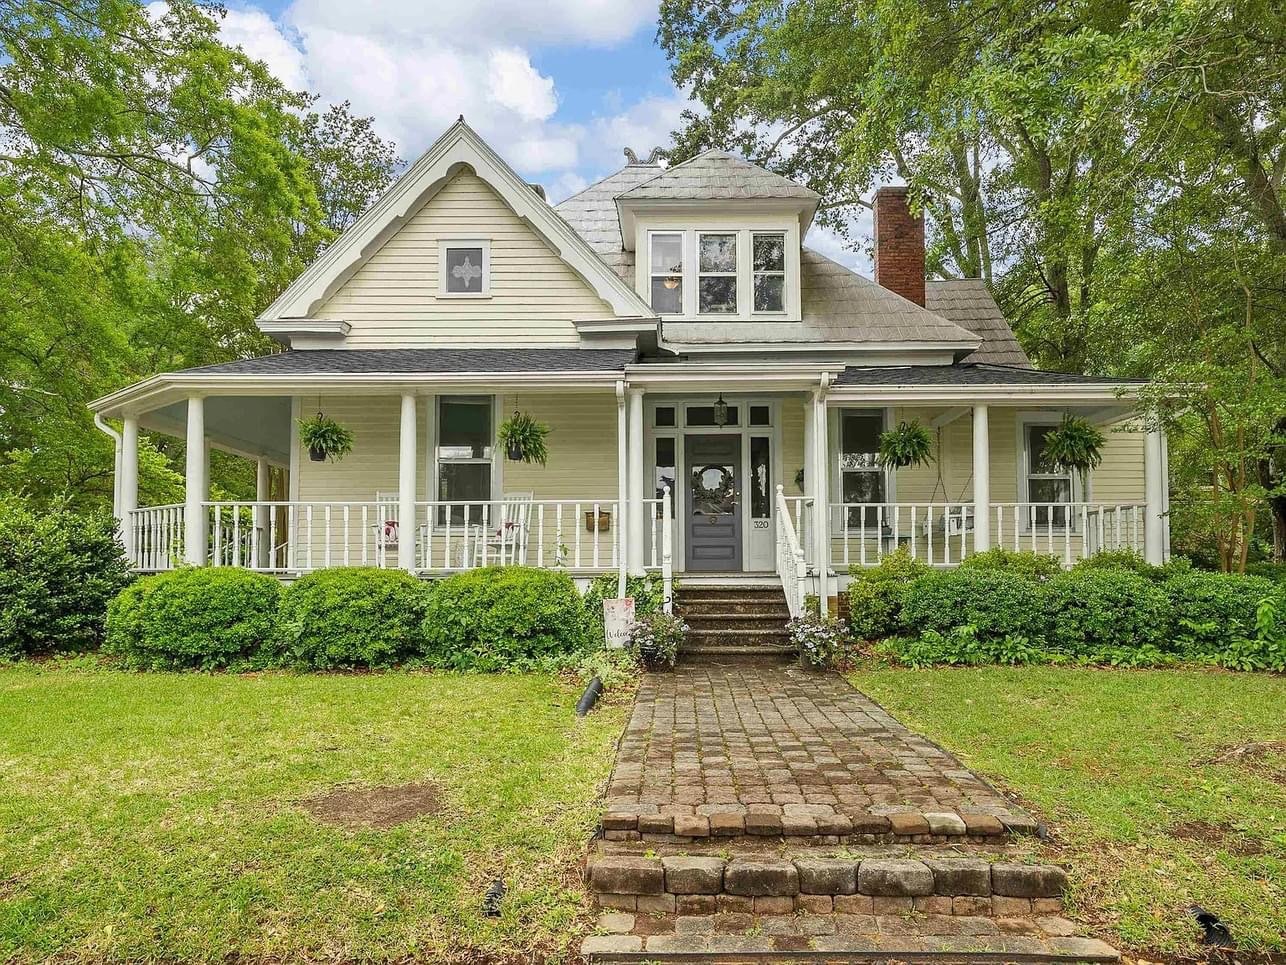 1914 Historic House For Sale In Gaffney South Carolina